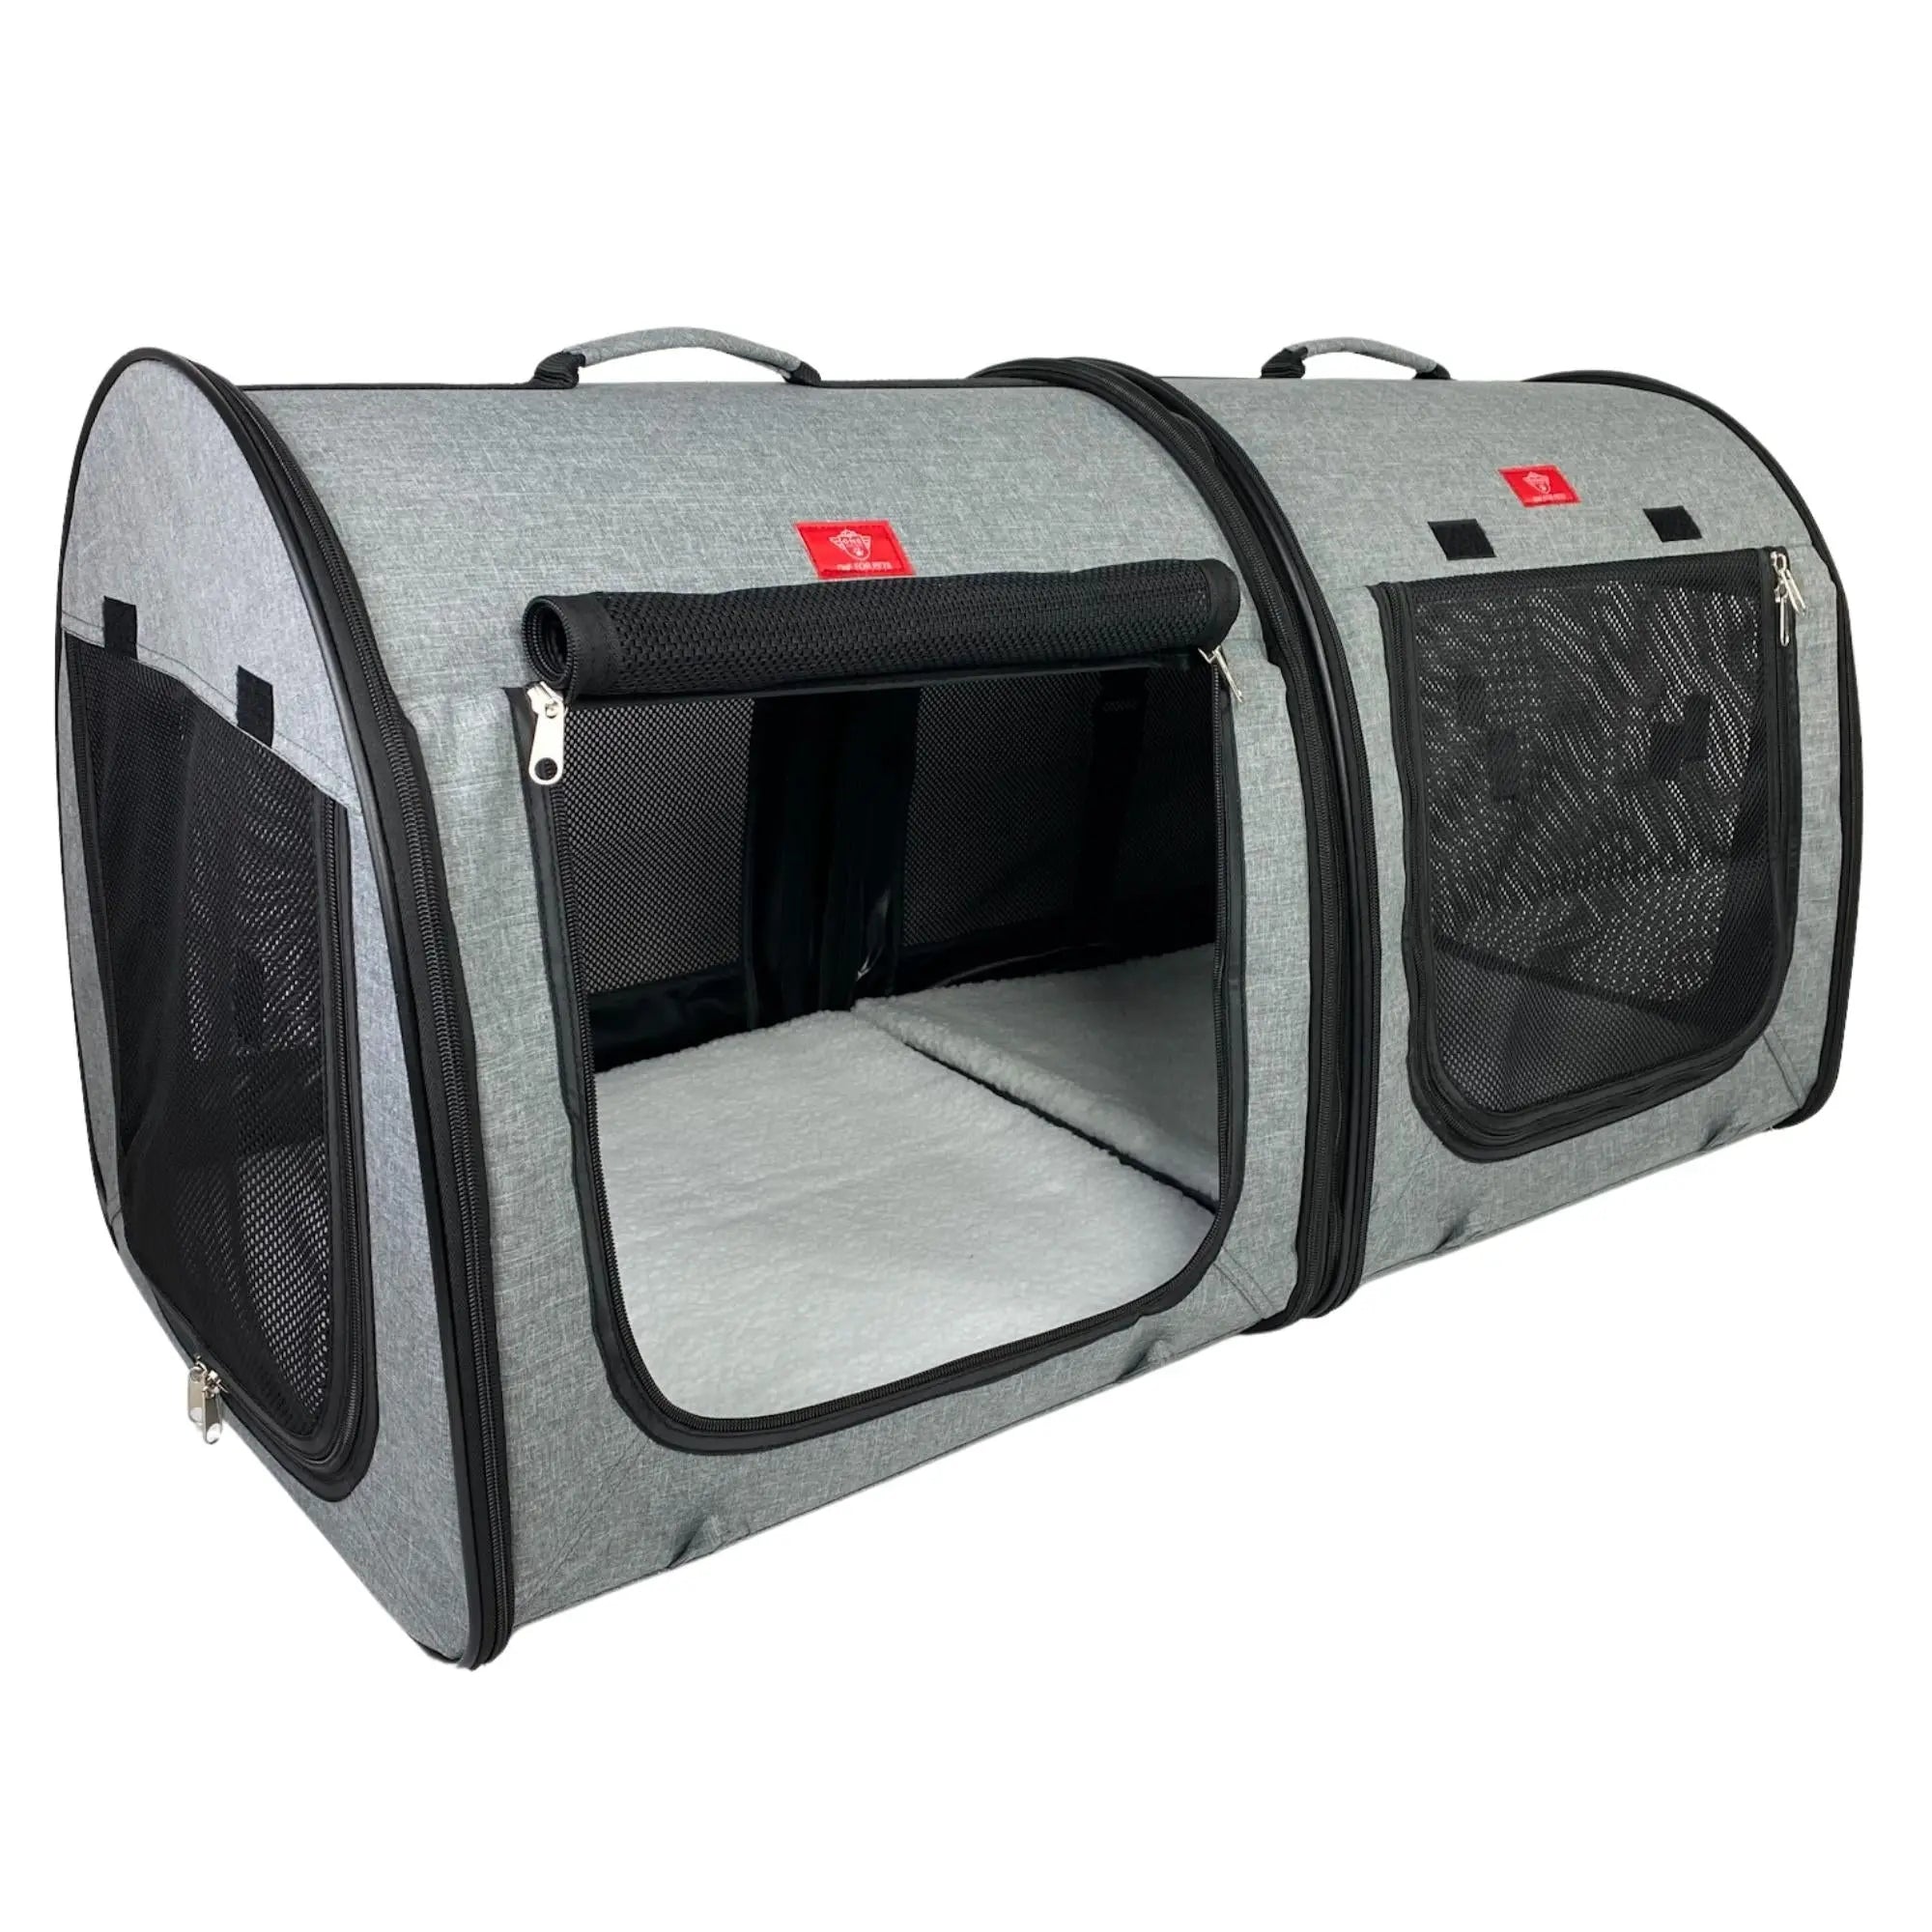 One for Pets Portable Double Kennel